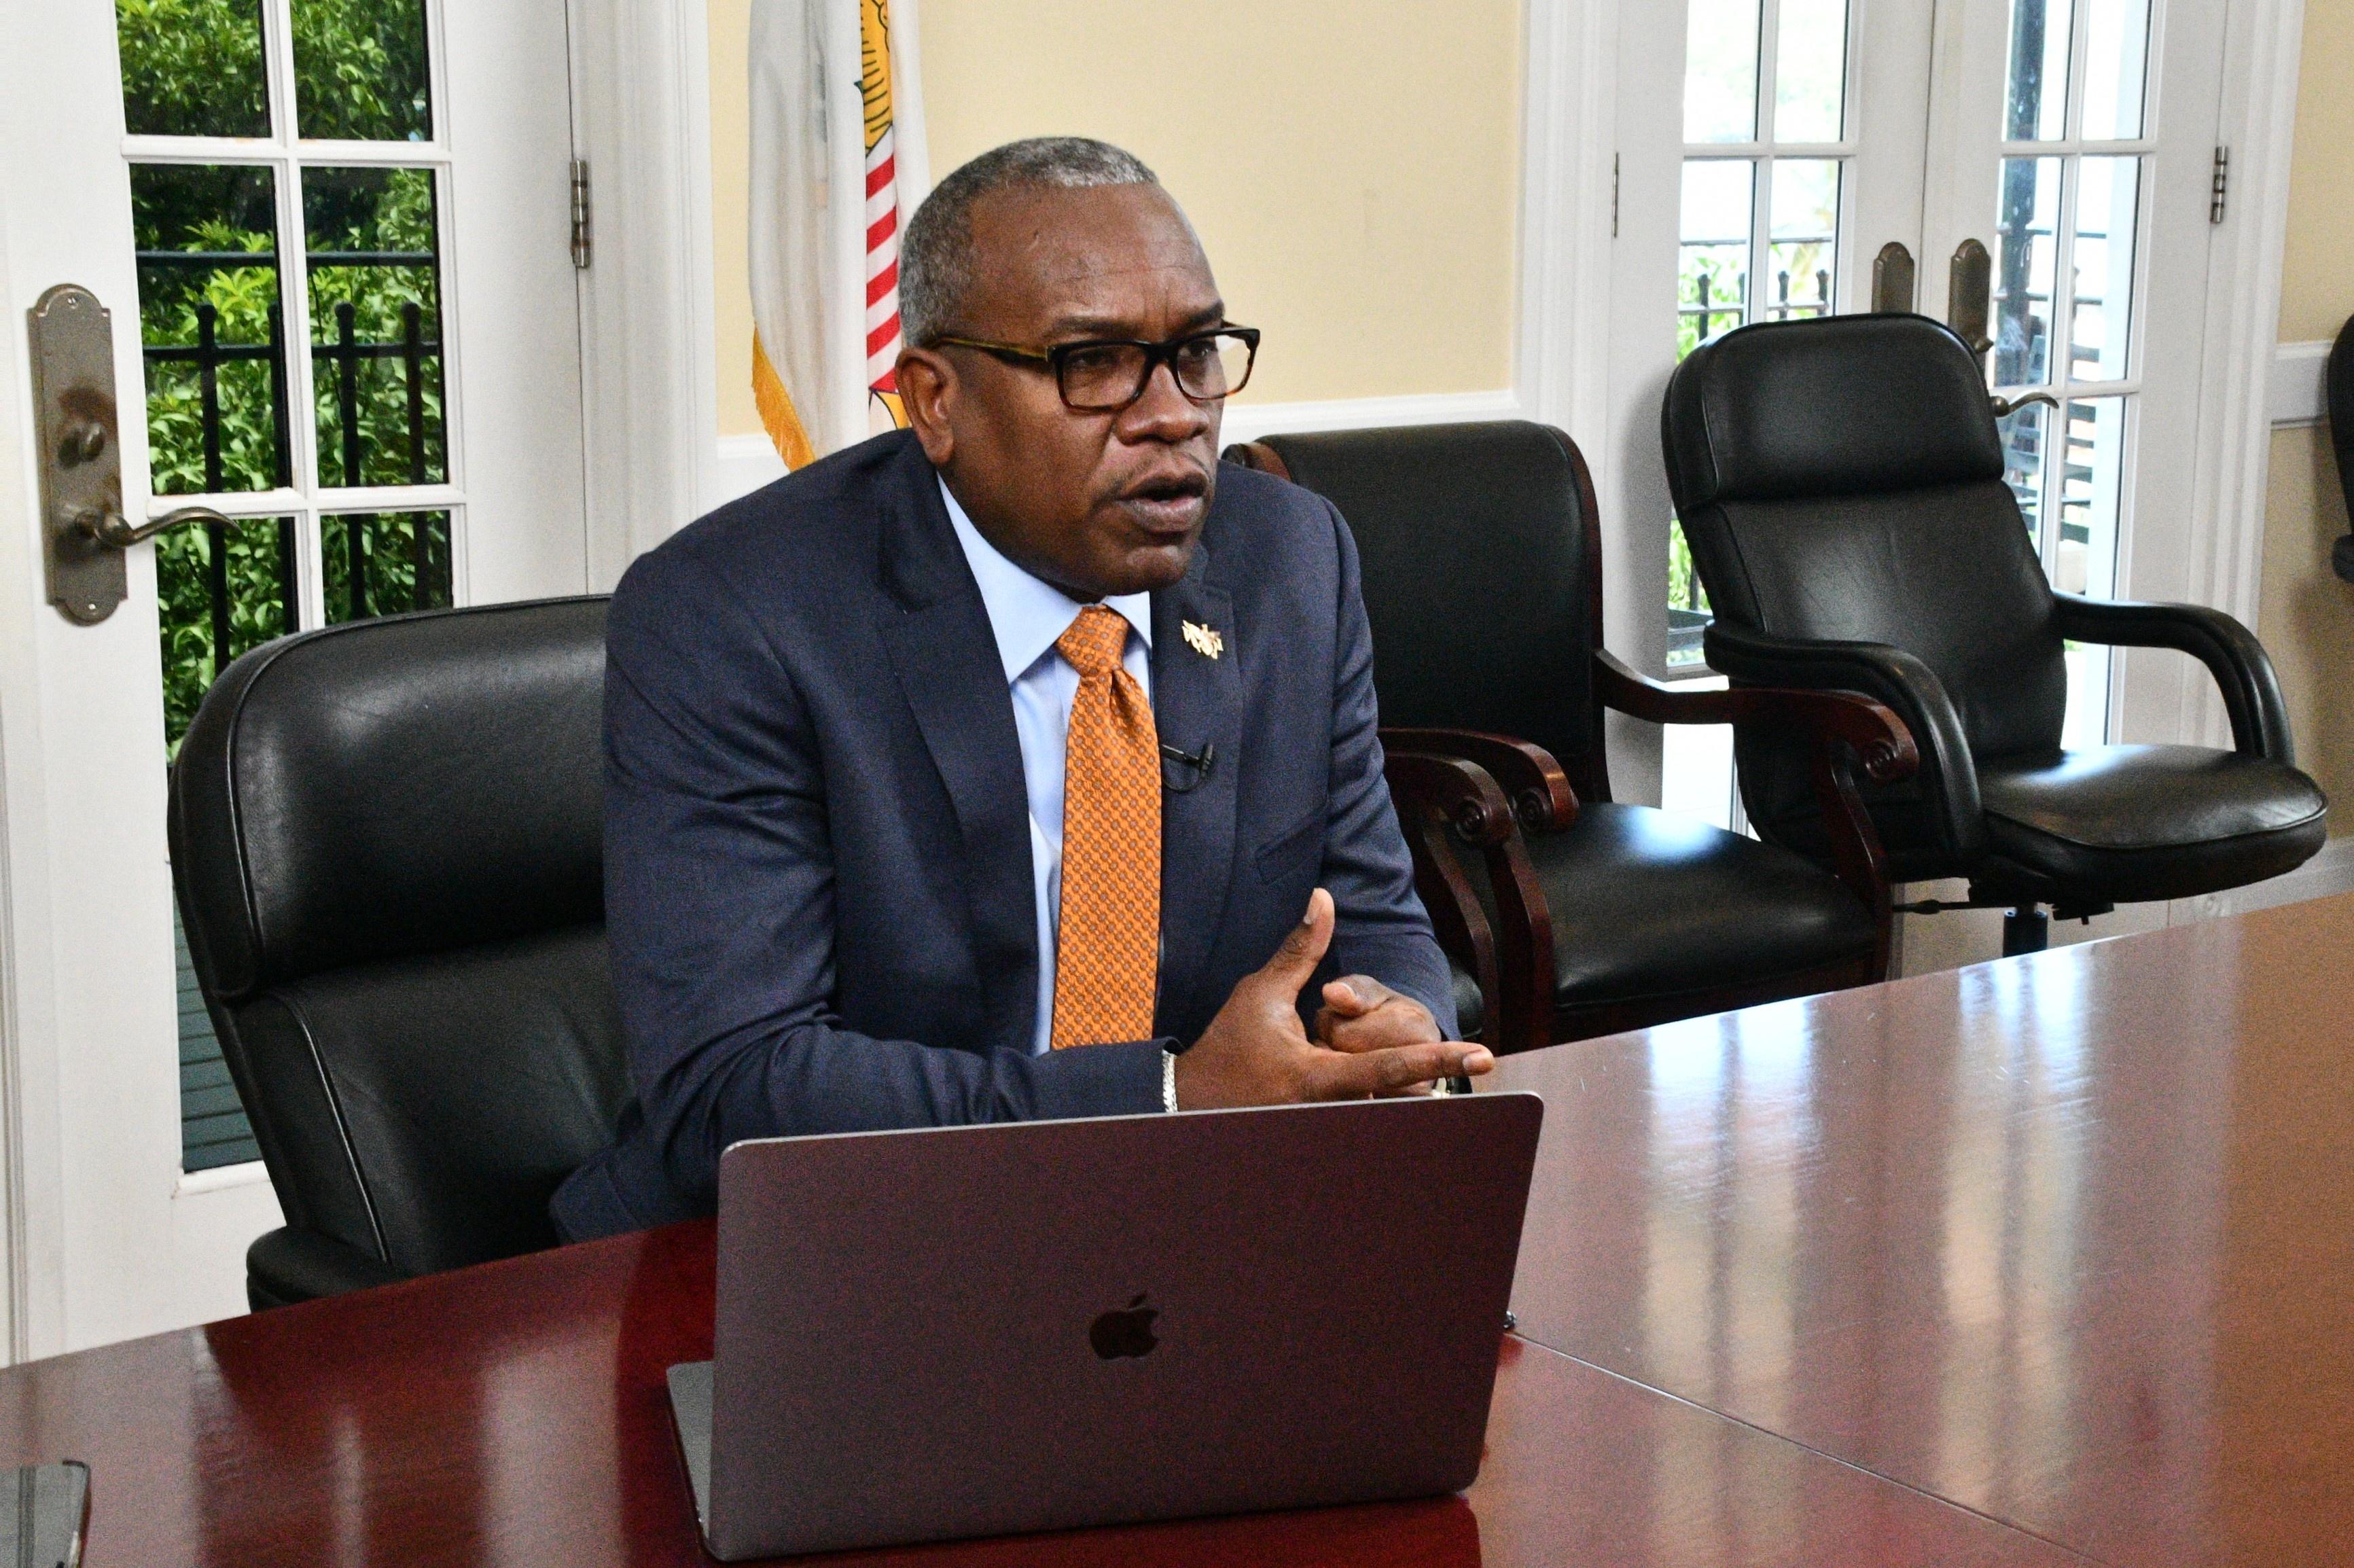 Governor Bryan at Press Conference at the Public Finance Authority on St. Thomas